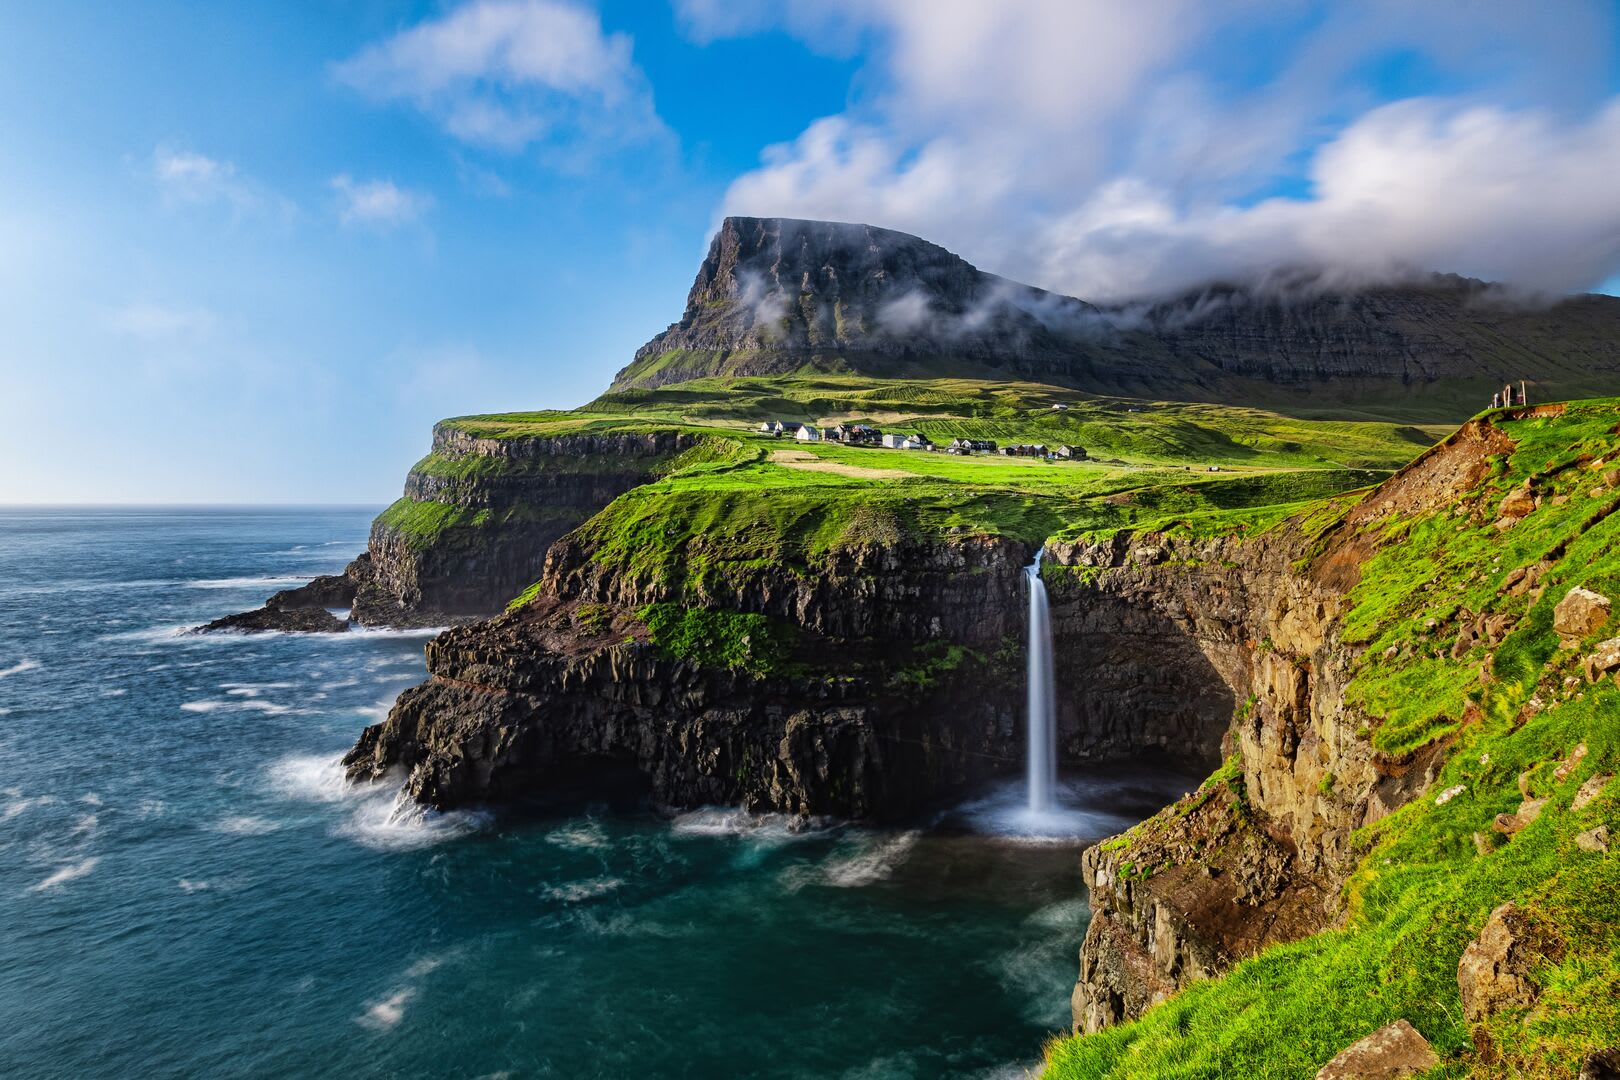 Icelandair announces new route to the Faroe Islands